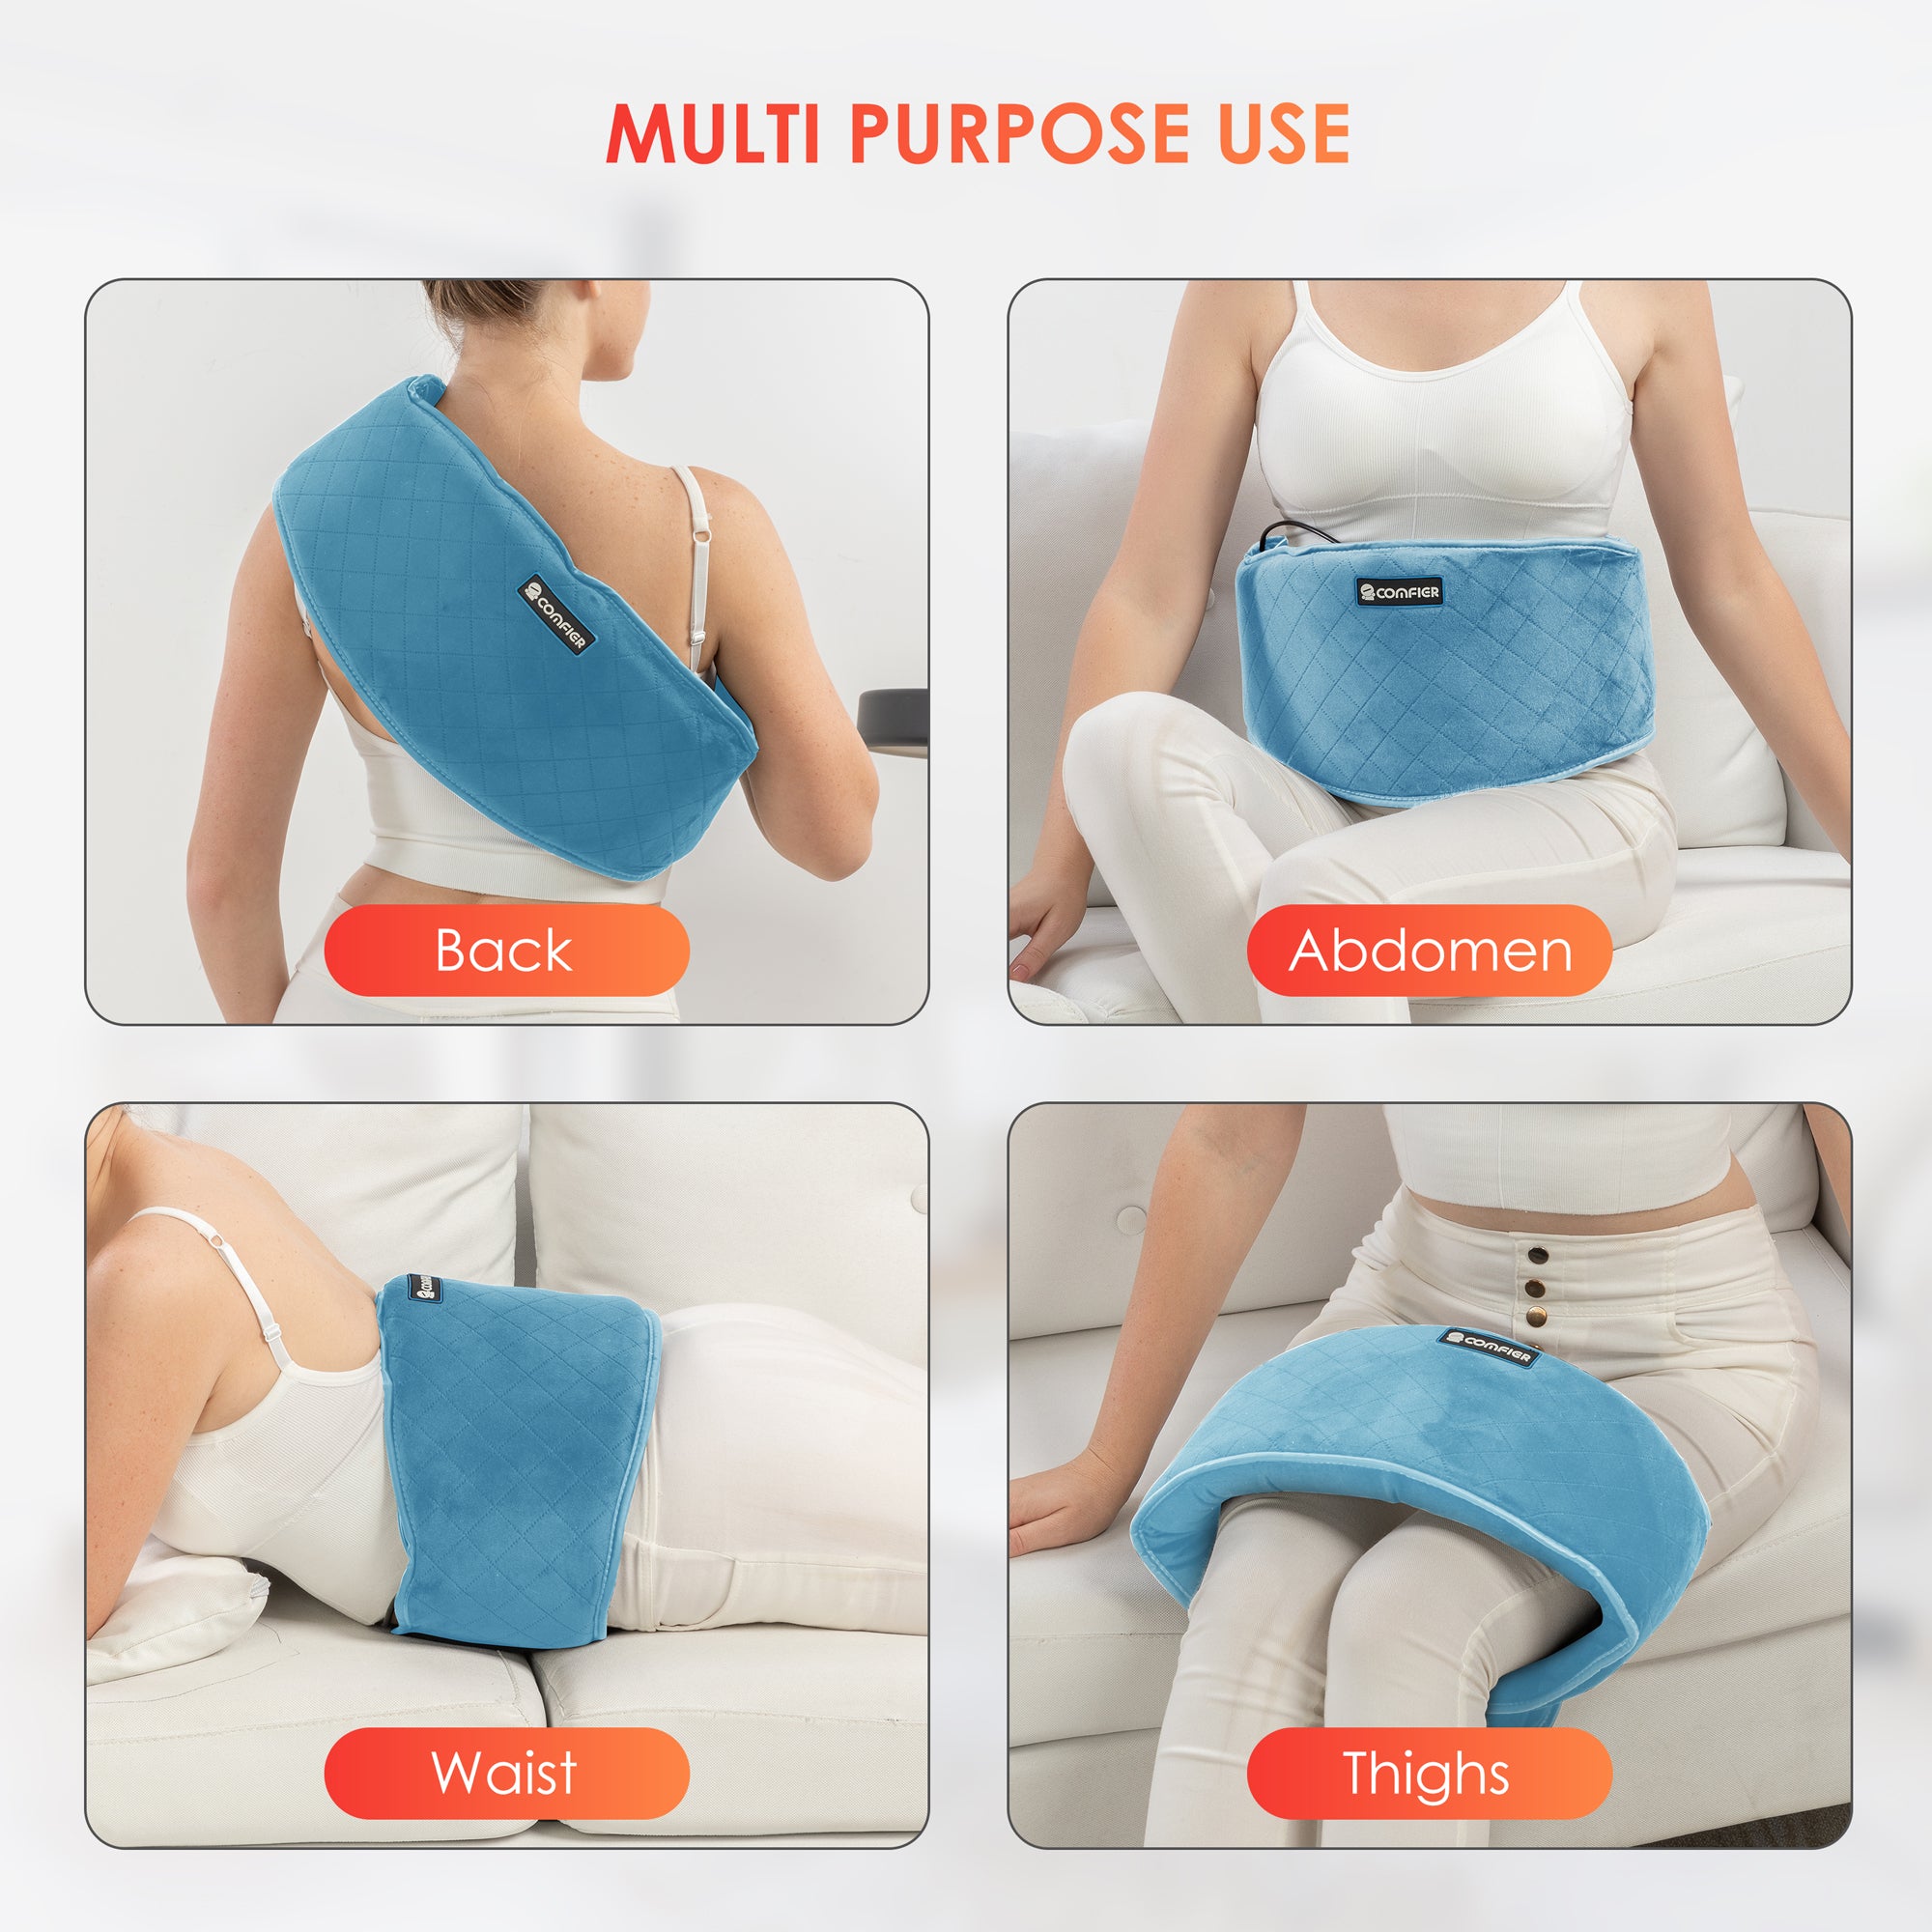 Comfier Heating Pad for Back Pain Relief, Heating Waist Belt with Adjustable Heat  - 6006NB